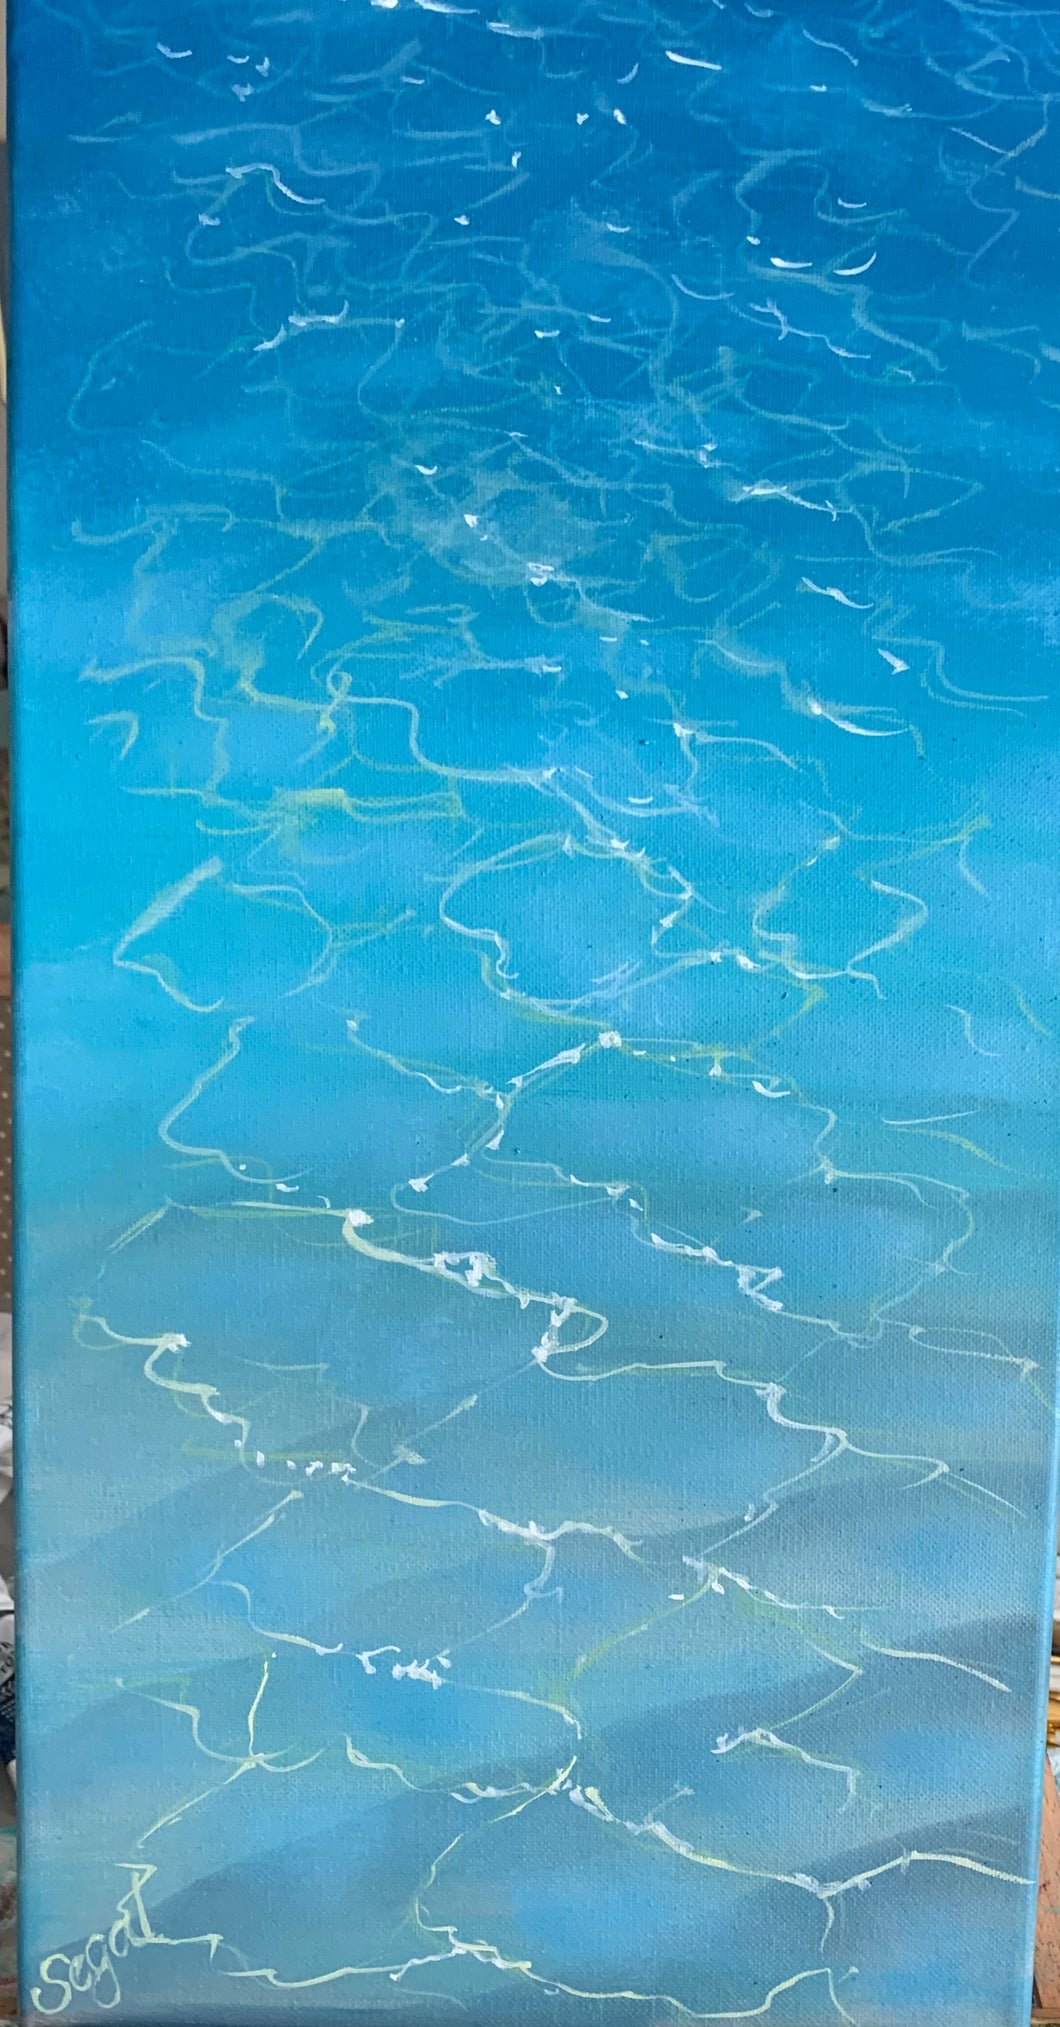 Water Study 2 - 10x20 Oil on Canvas